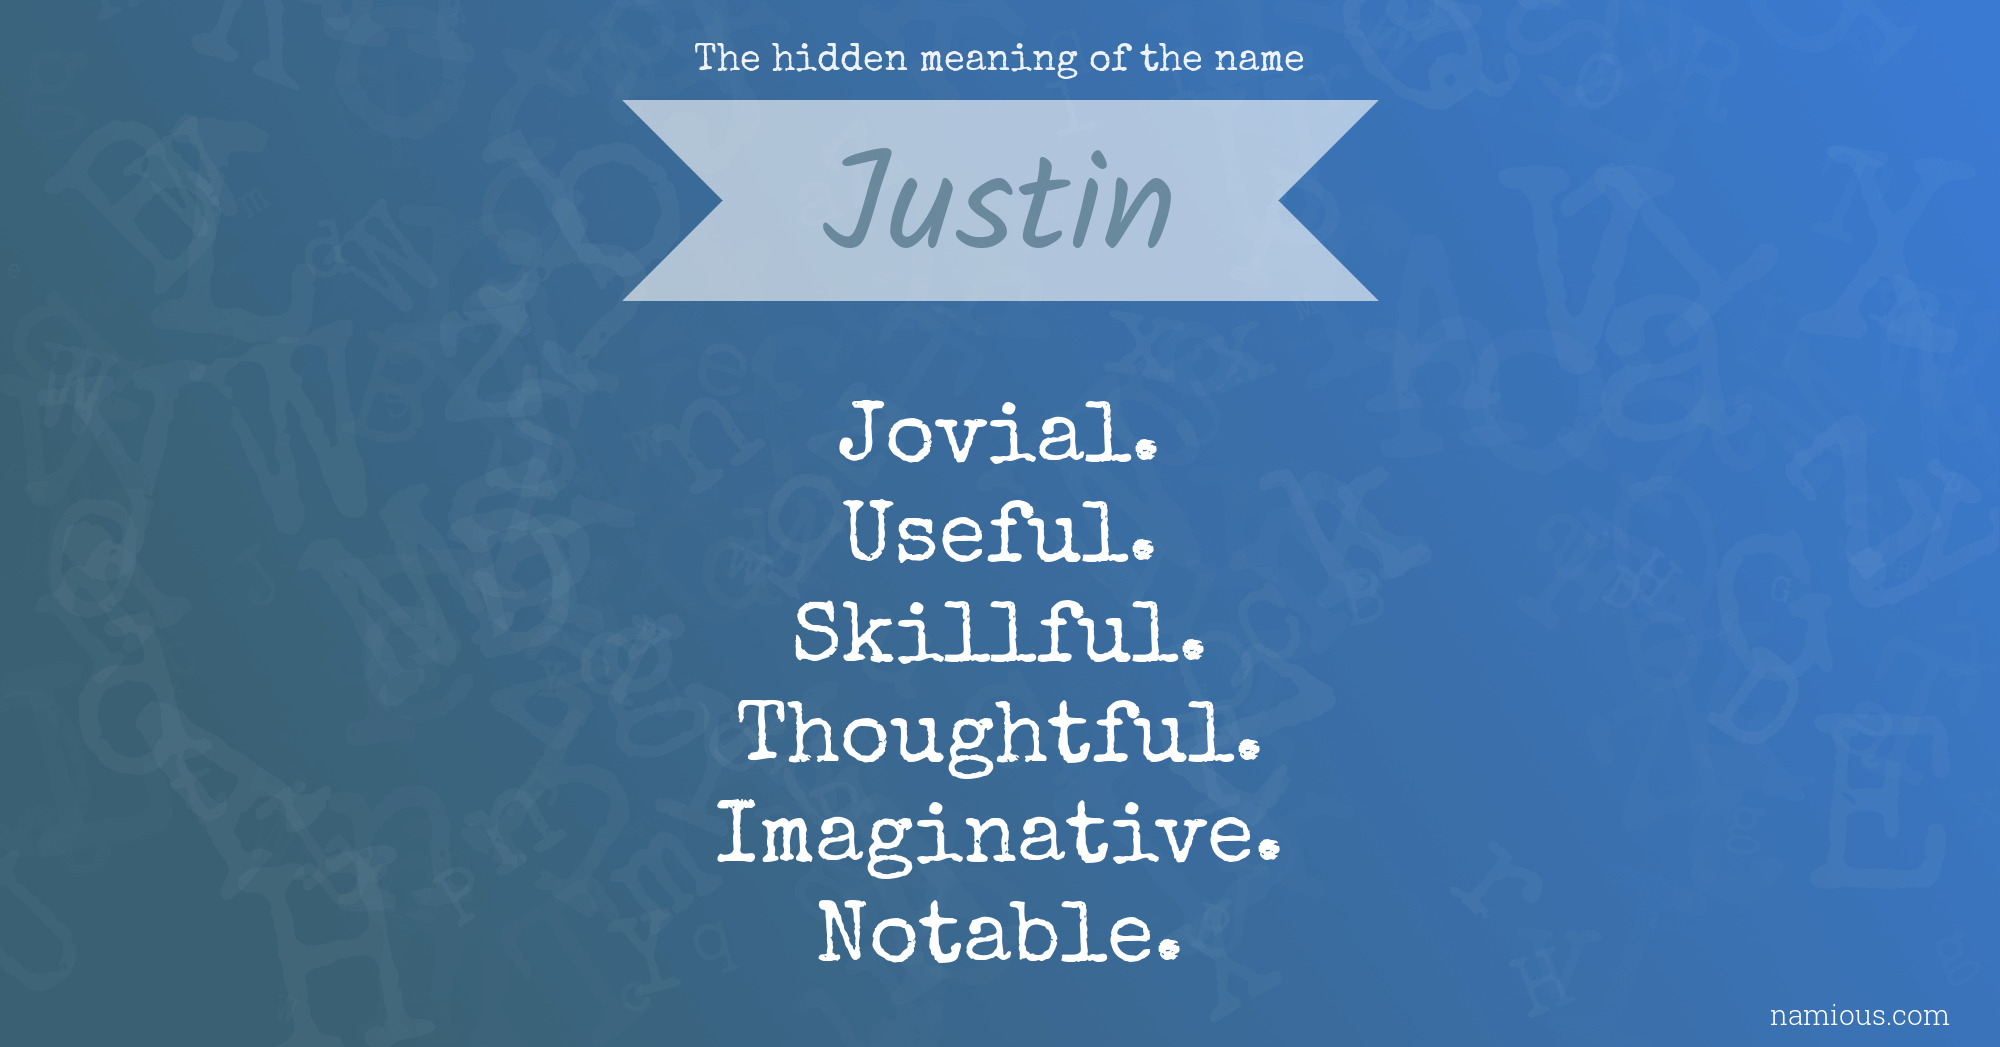 The hidden meaning of the name Justin